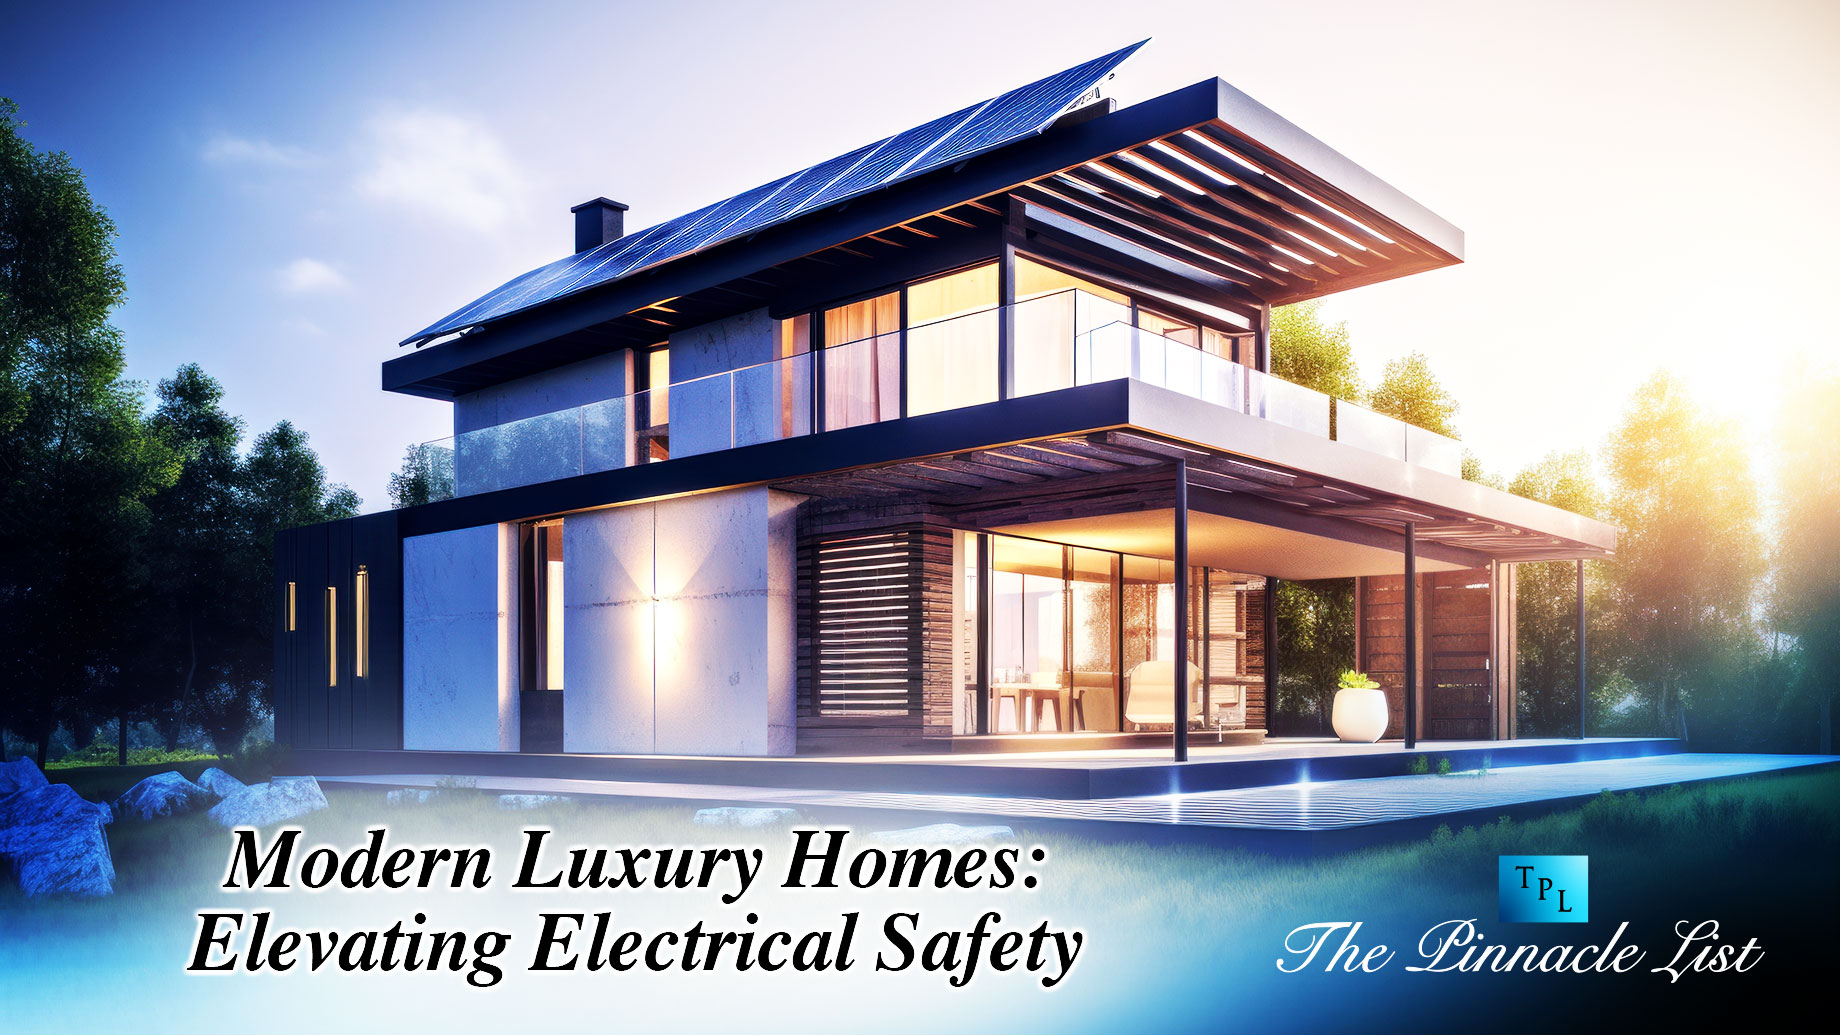 Modern Luxury Homes: Elevating Electrical Safety